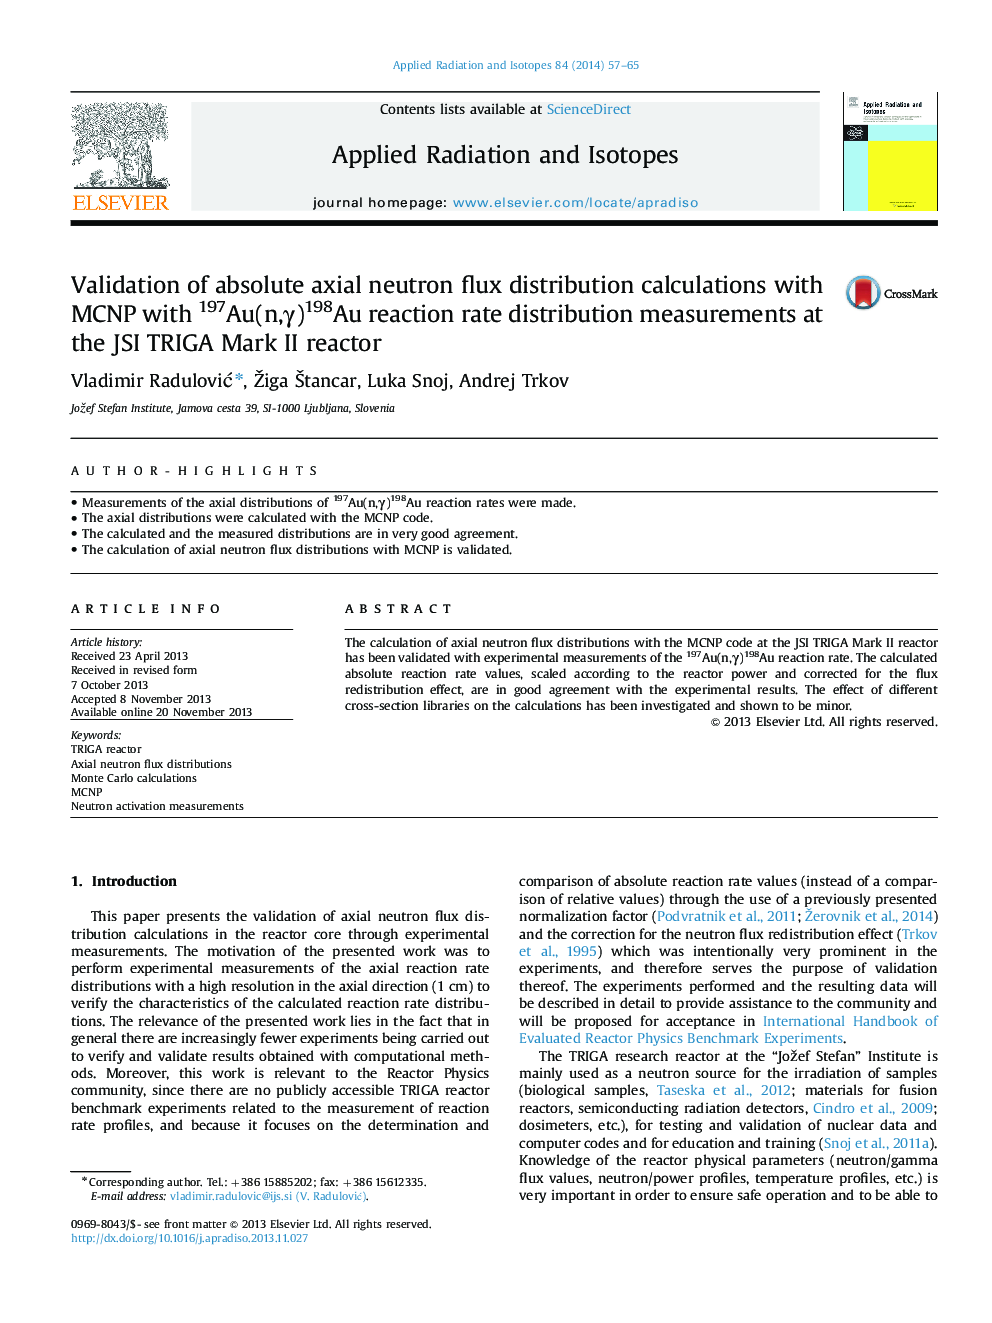 Validation of absolute axial neutron flux distribution calculations with MCNP with 197Au(n,Î³)198Au reaction rate distribution measurements at the JSI TRIGA Mark II reactor